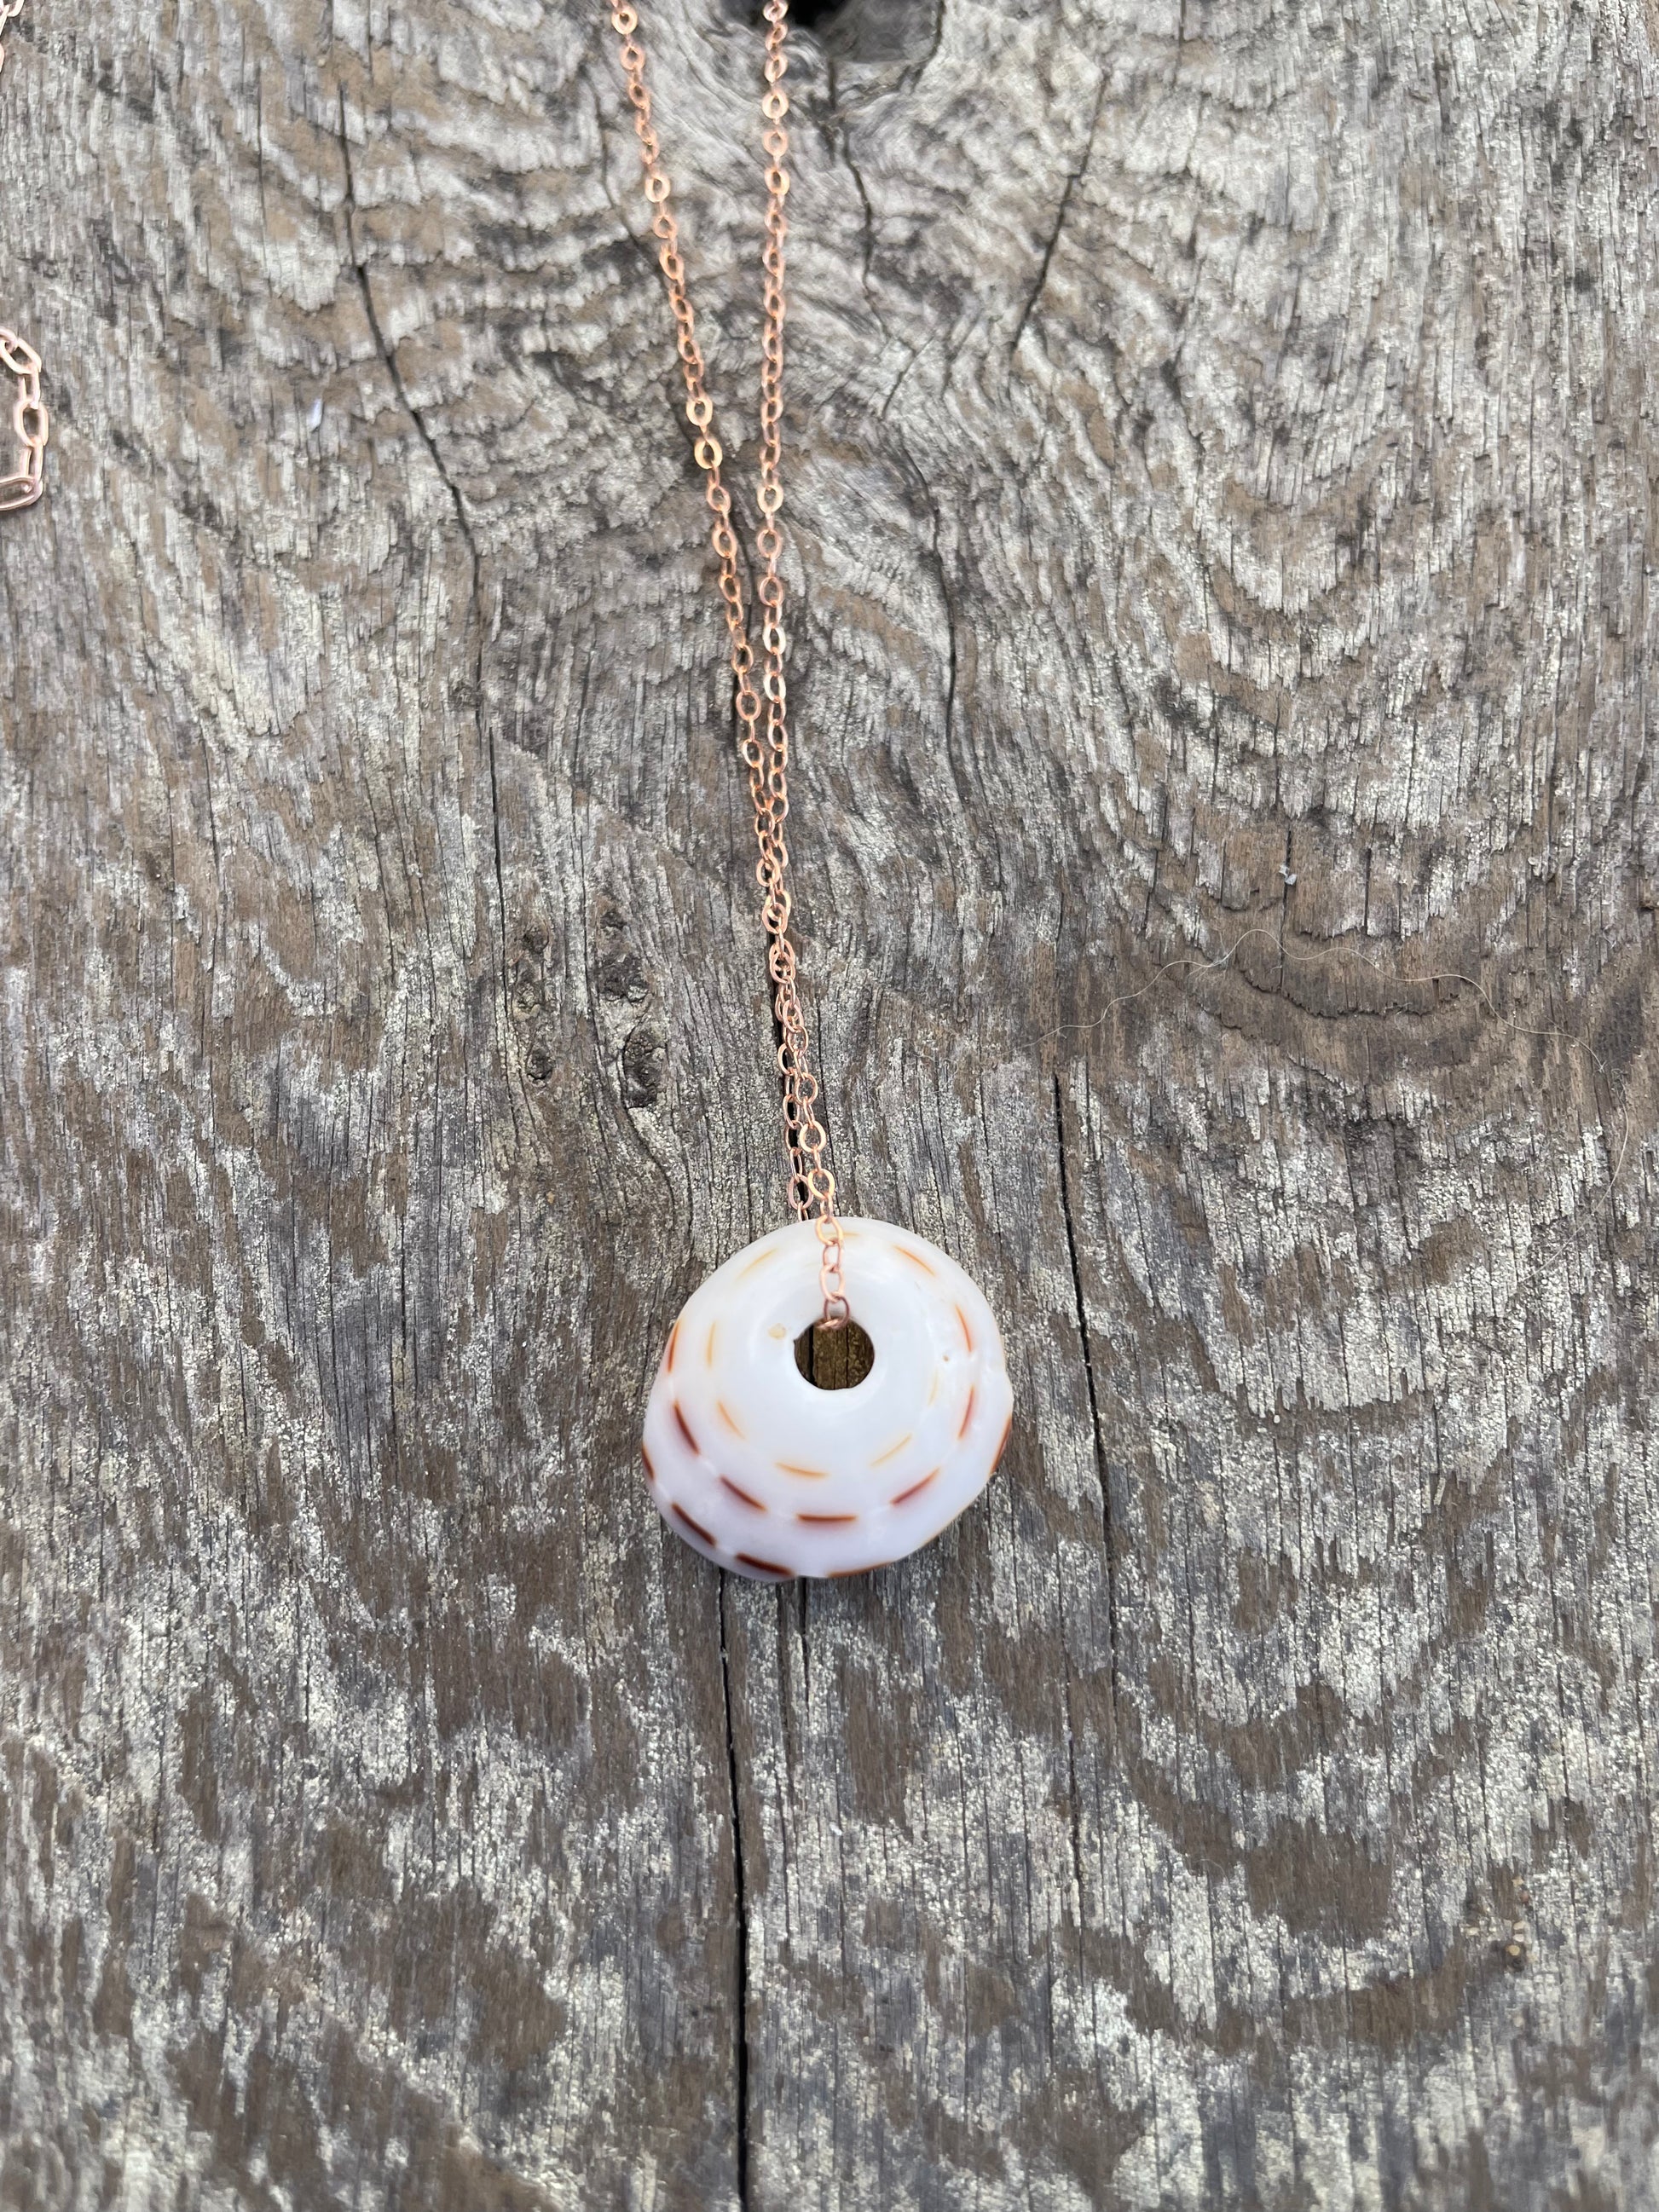 puka shell on a goldfilled chain on a wooden background